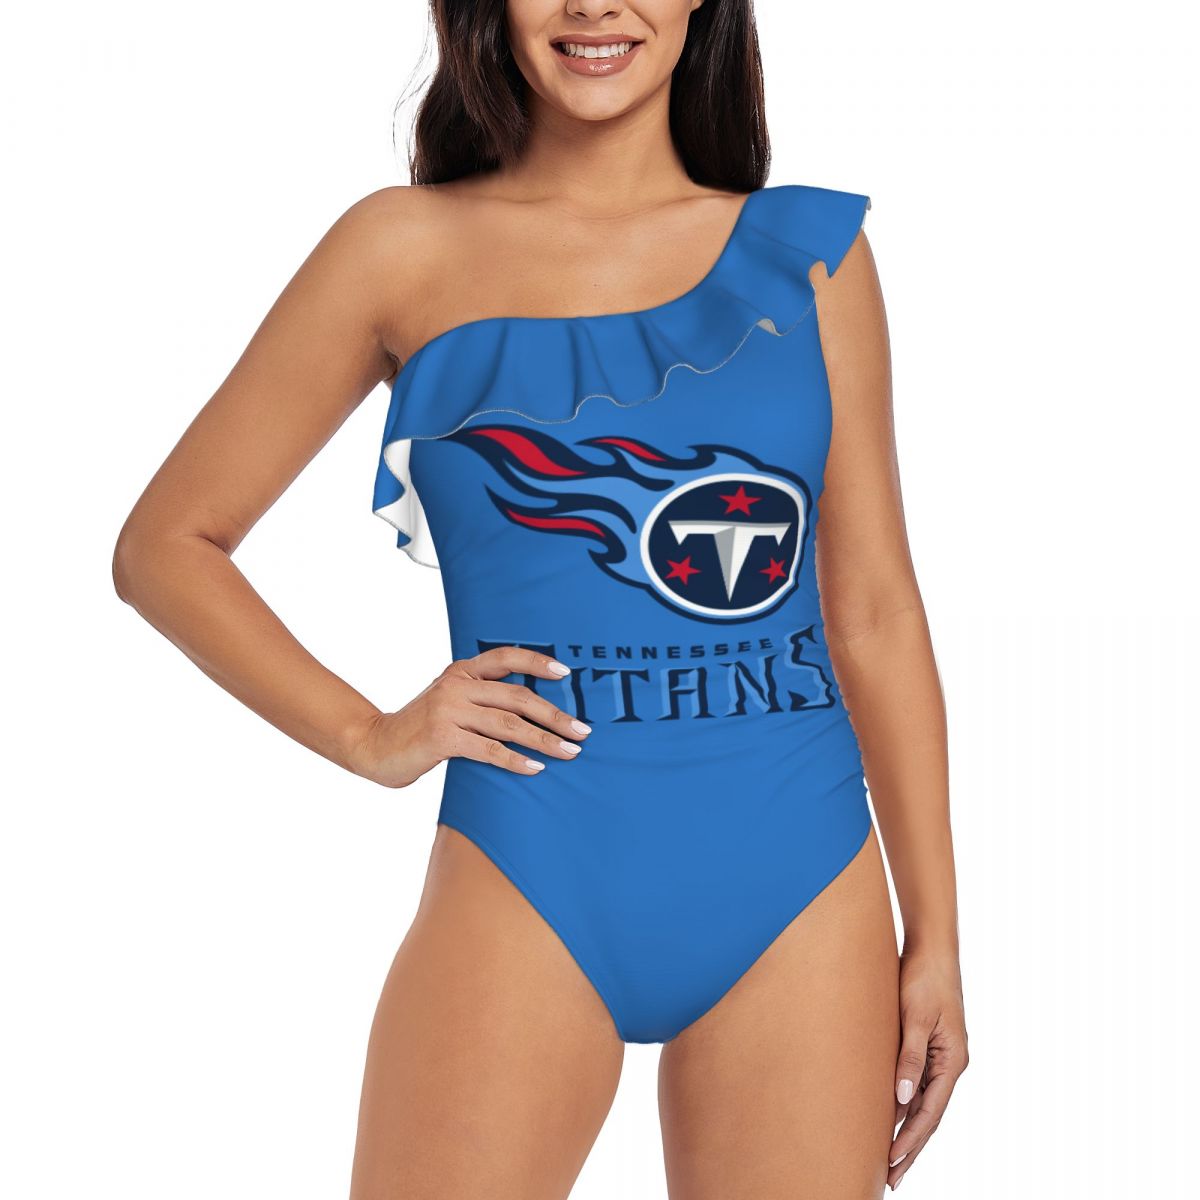 Tennessee Titans One Shoulder Ruffle Bathing Suit